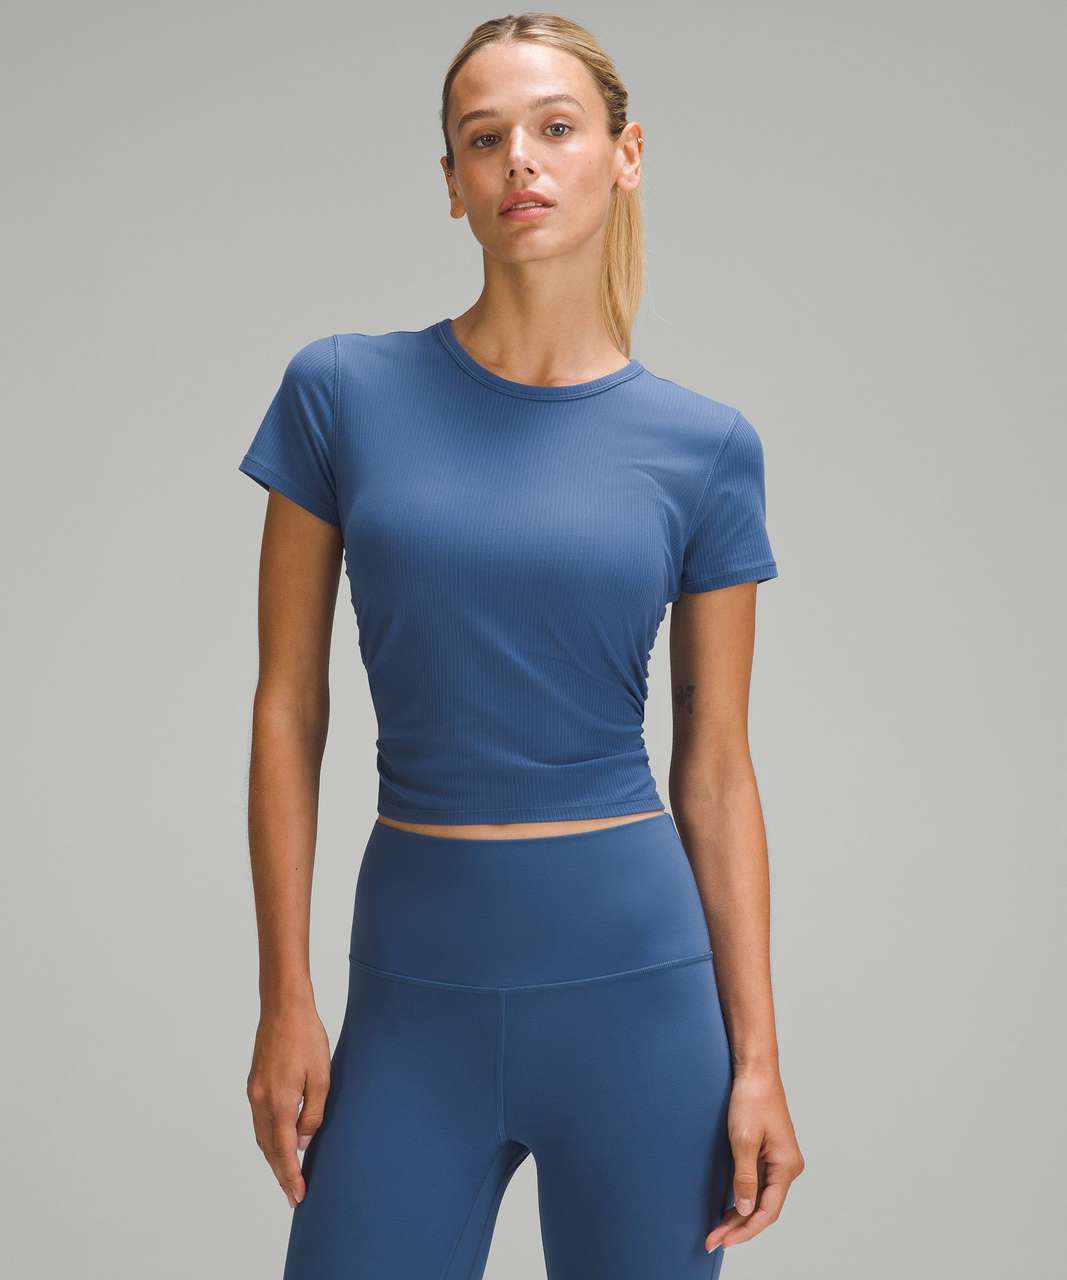 Lululemon All It Takes Ribbed Nulu T-Shirt - Pitch Blue